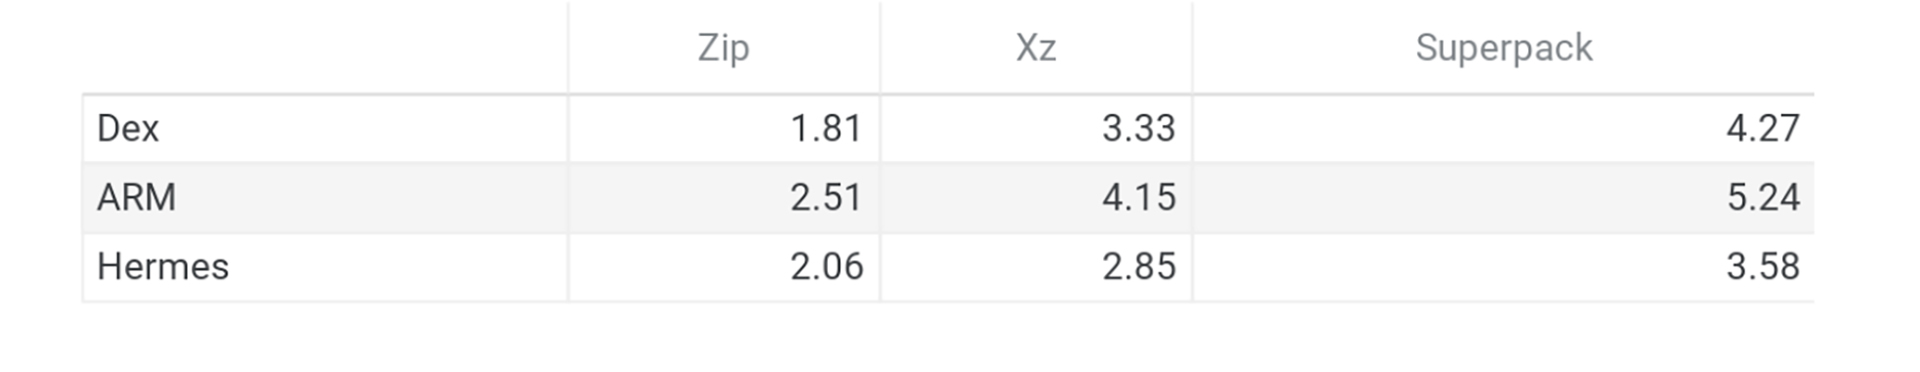 The compression ratios yielded by Zip, Xz, and Superpack for these three formats are shown in the table below.